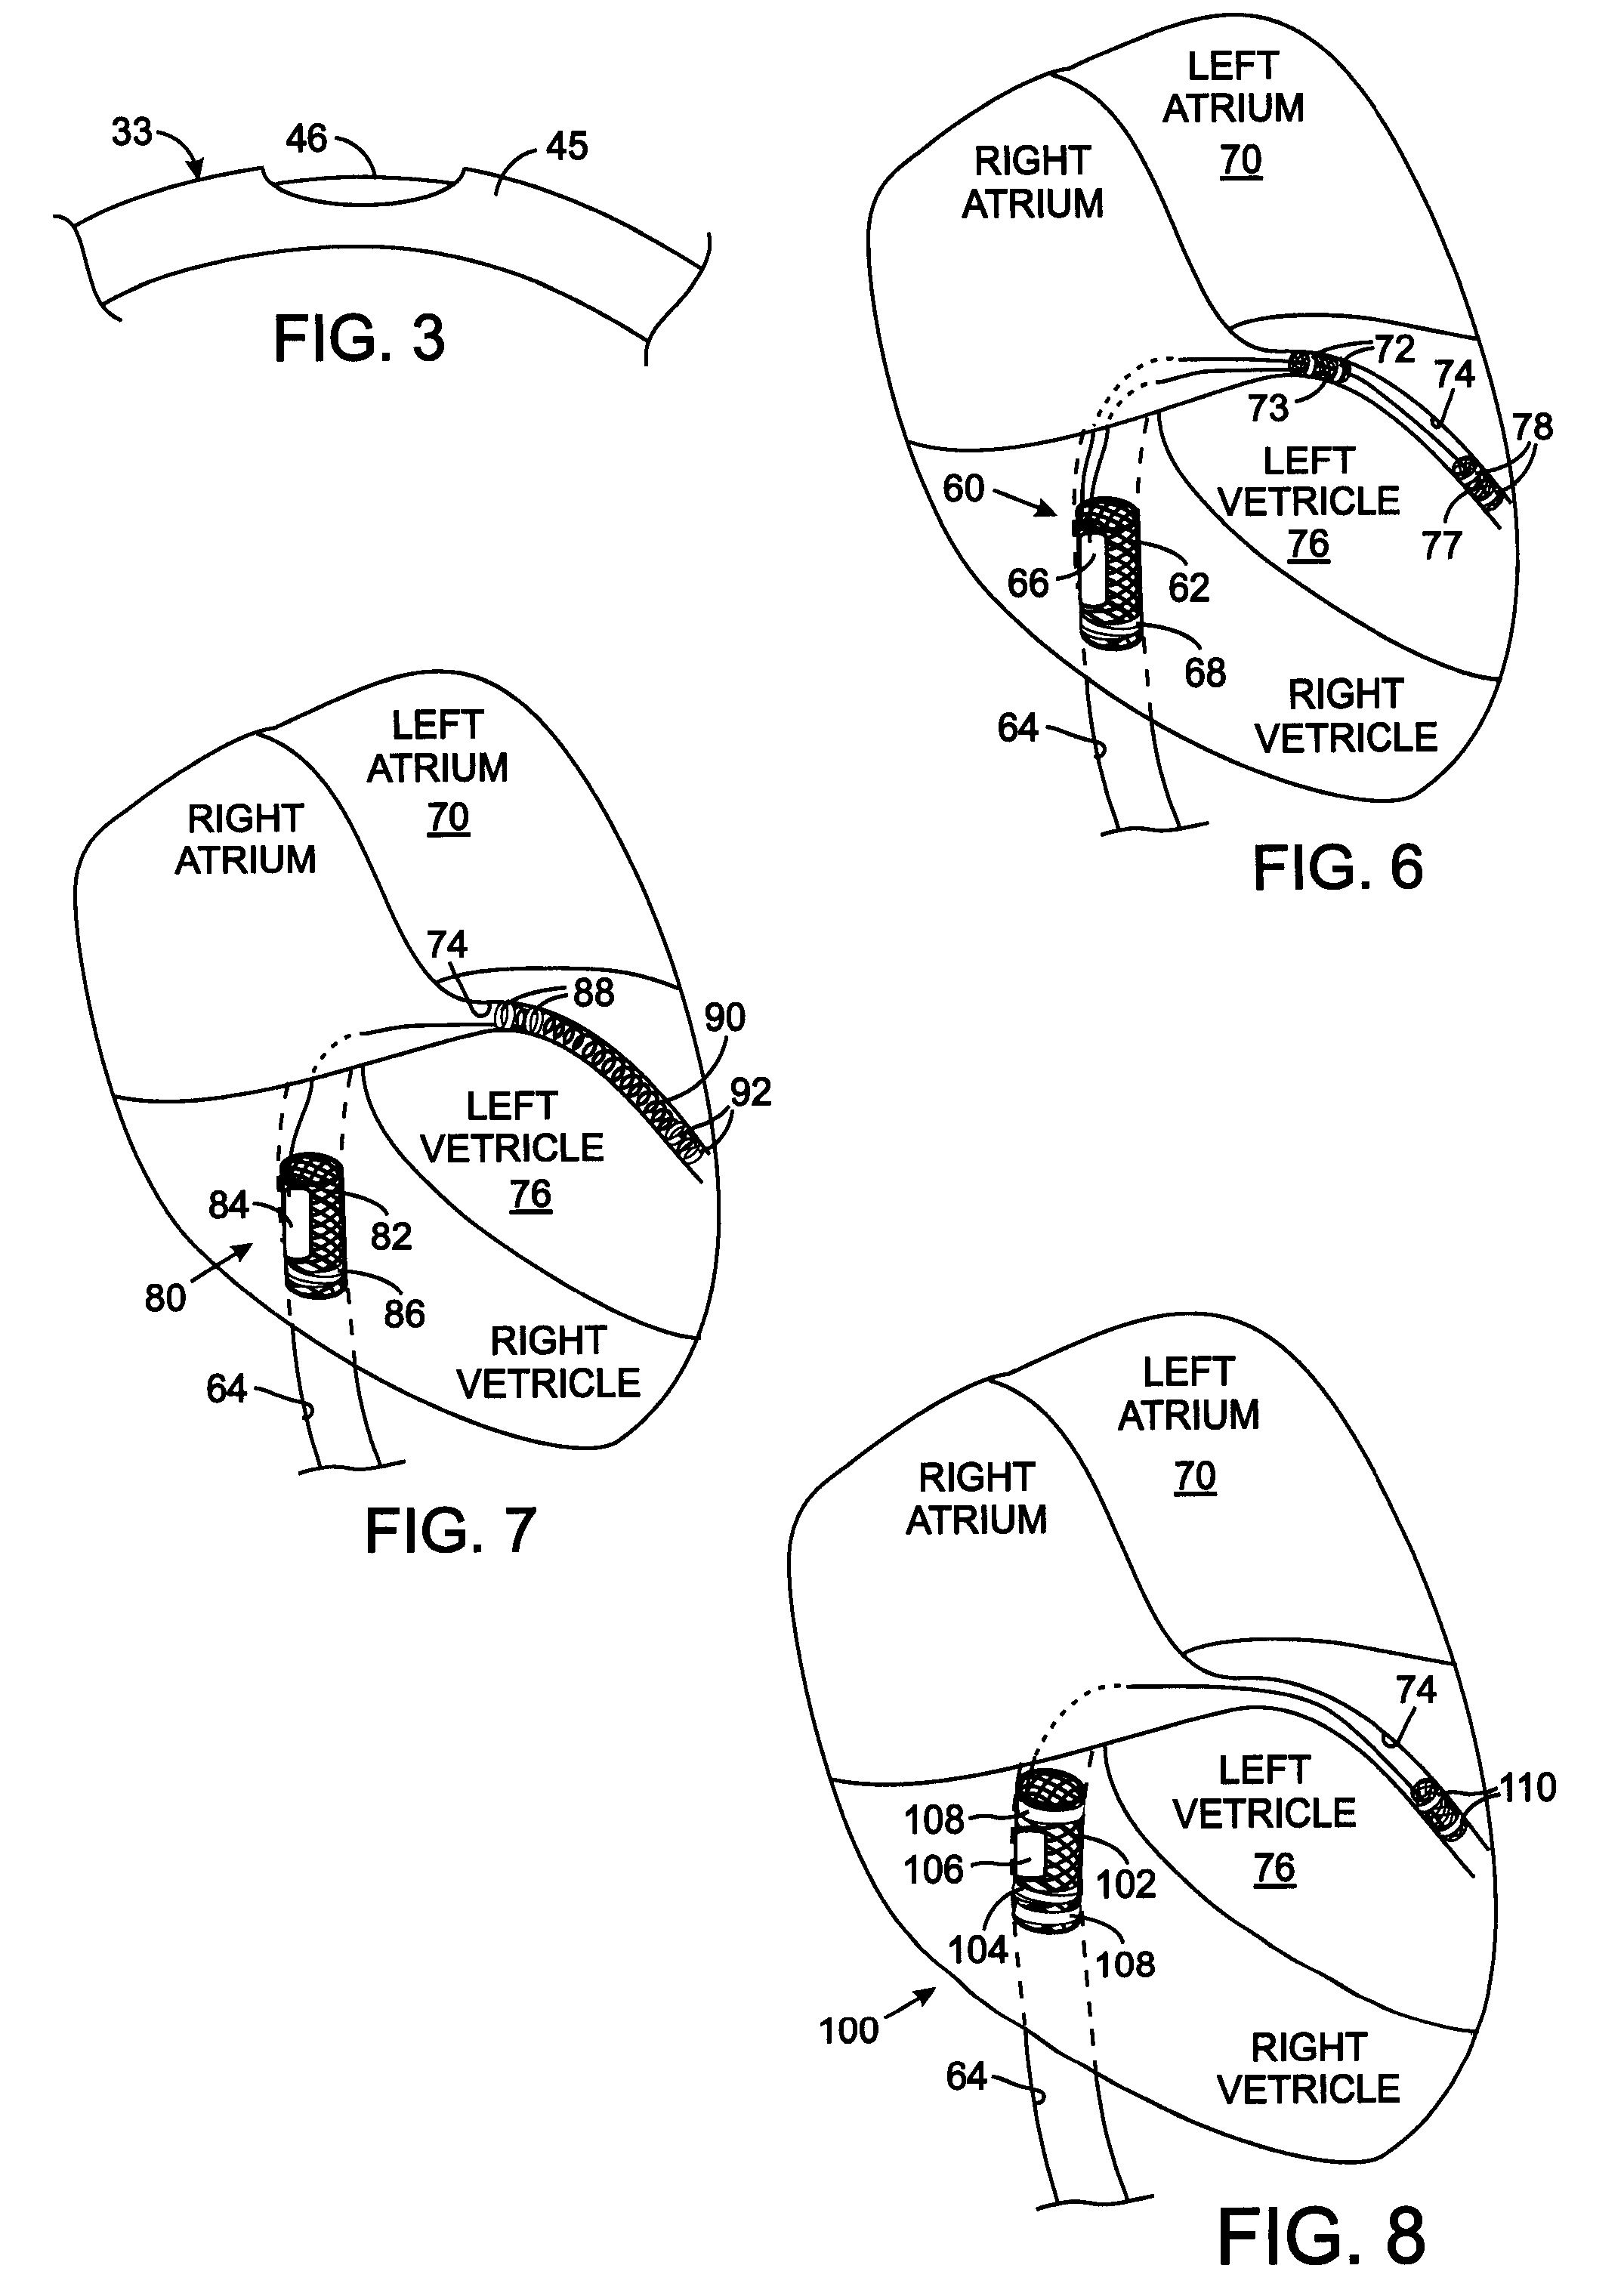 Intravascular Electronics Carrier Electrode for a Transvascular Tissue Stimulation System